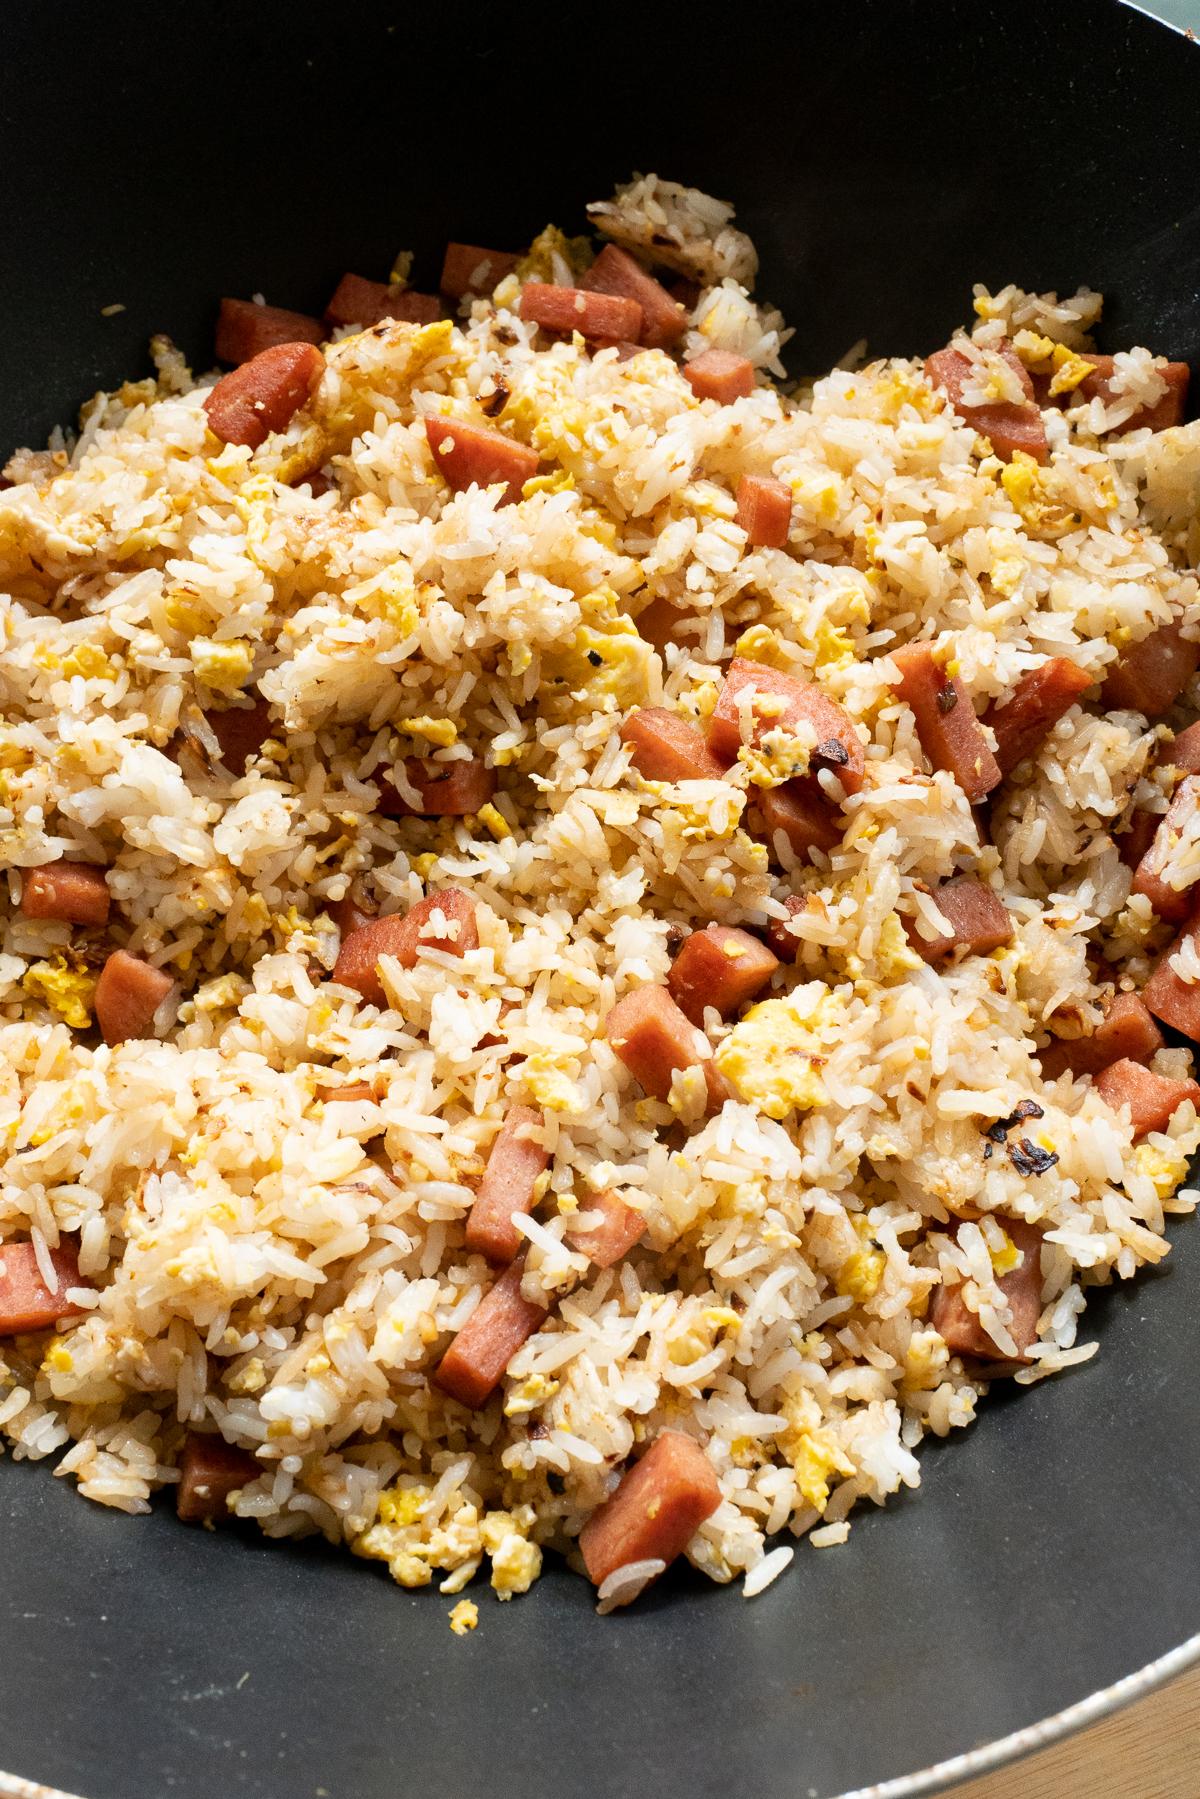 A just-cooked batch of Spam Fried Rice in the cooking pan